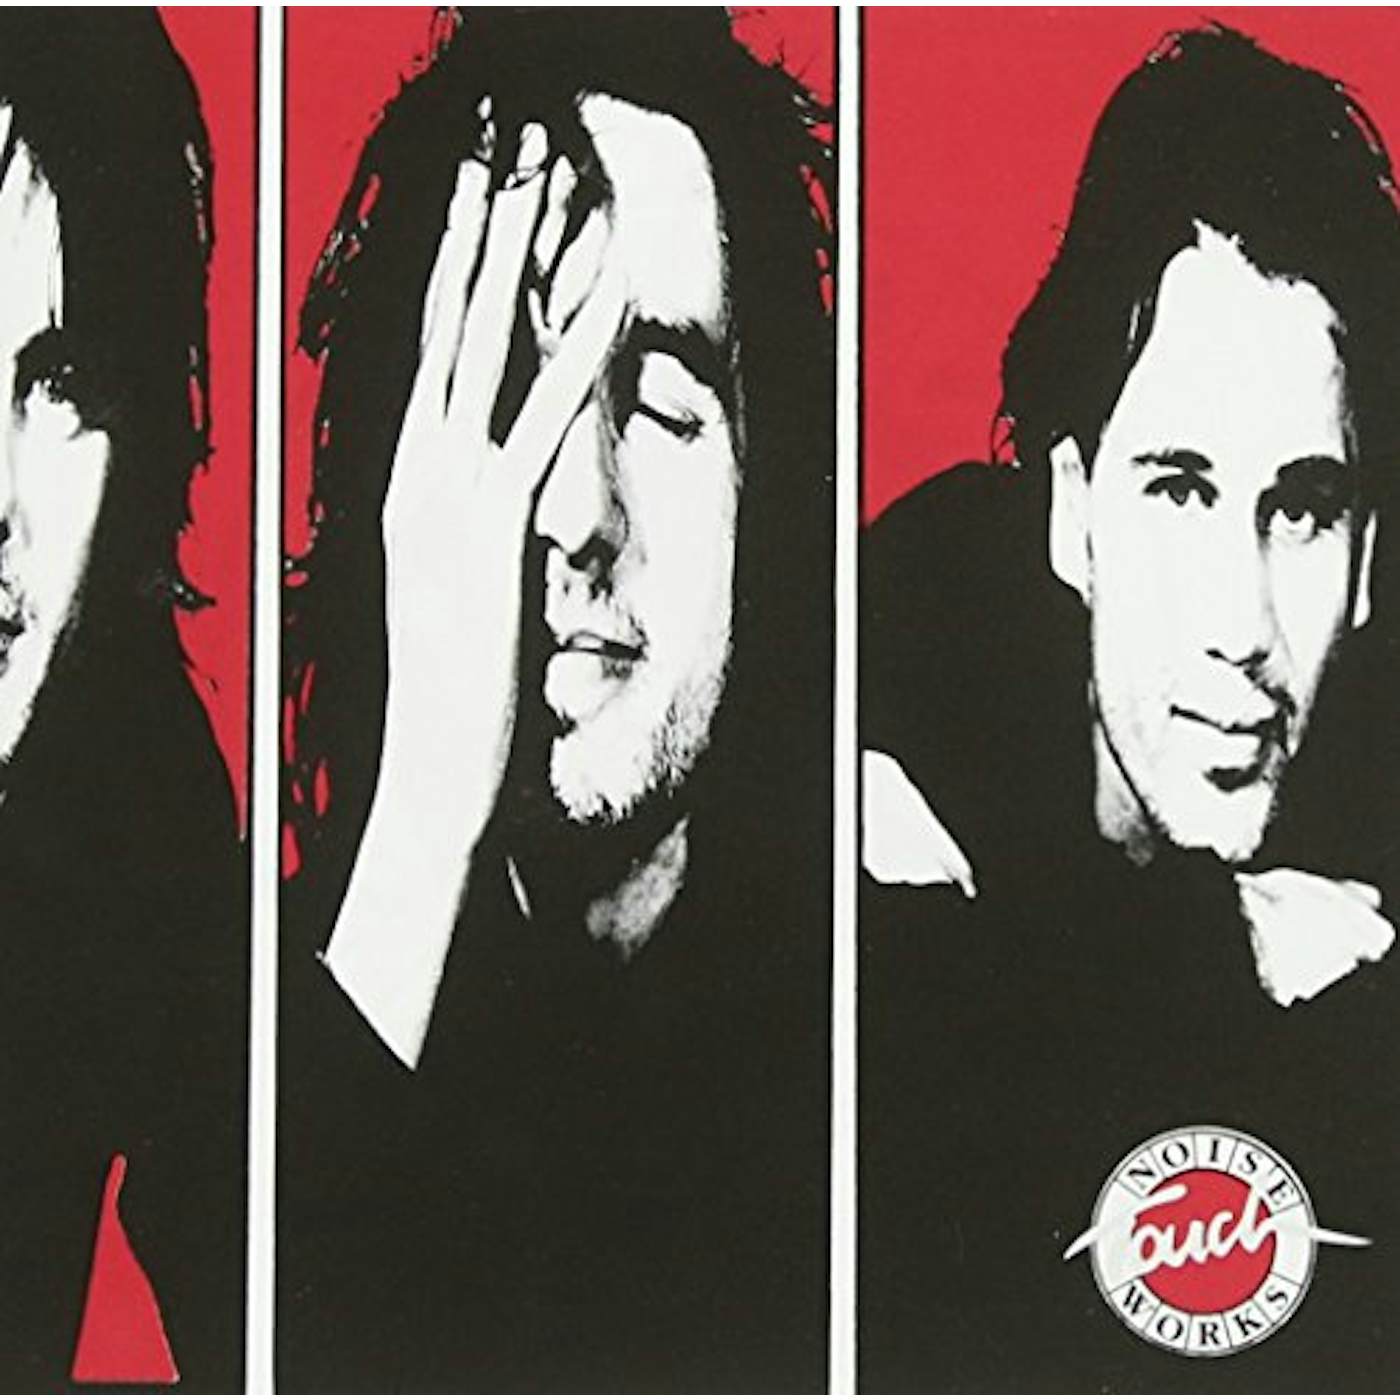 Noiseworks TOUCH (GOLD SERIES) CD